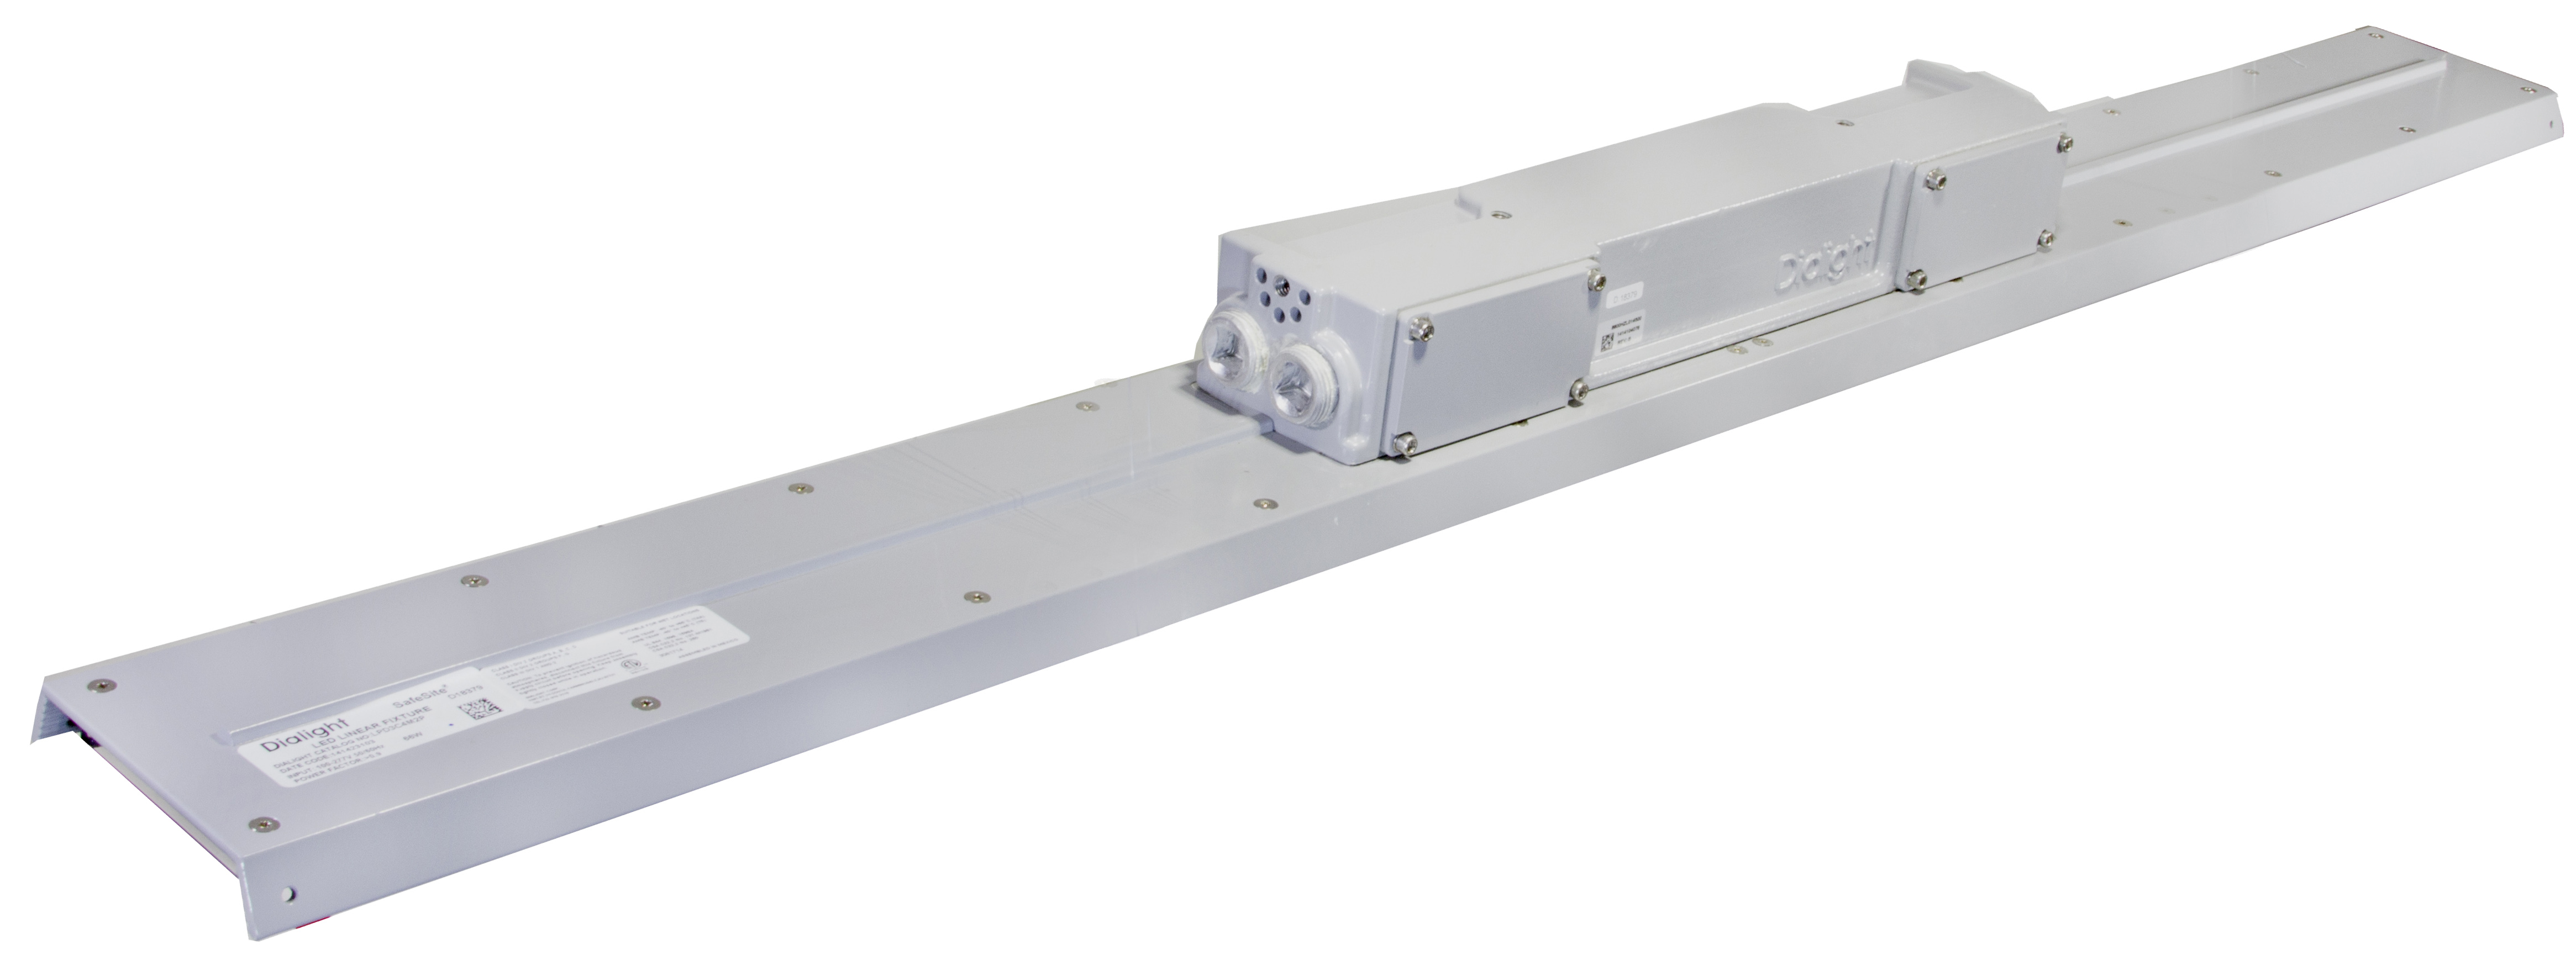 LED Linear Fixtures Backed by 10-Year Warranty